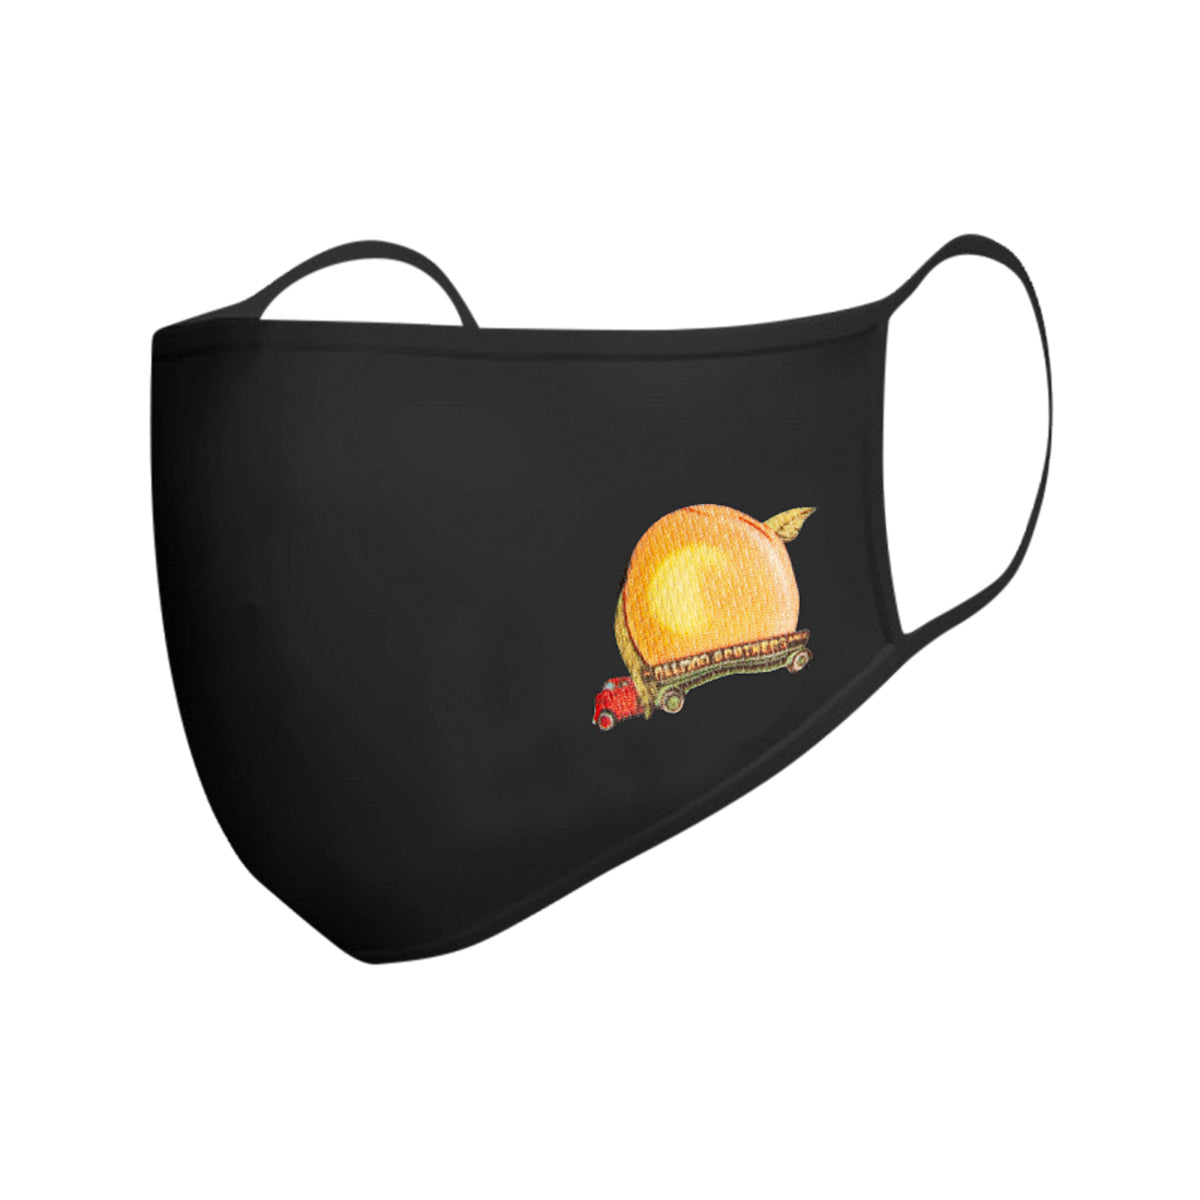 Allman Brothers Band EAT A PEACH Mask